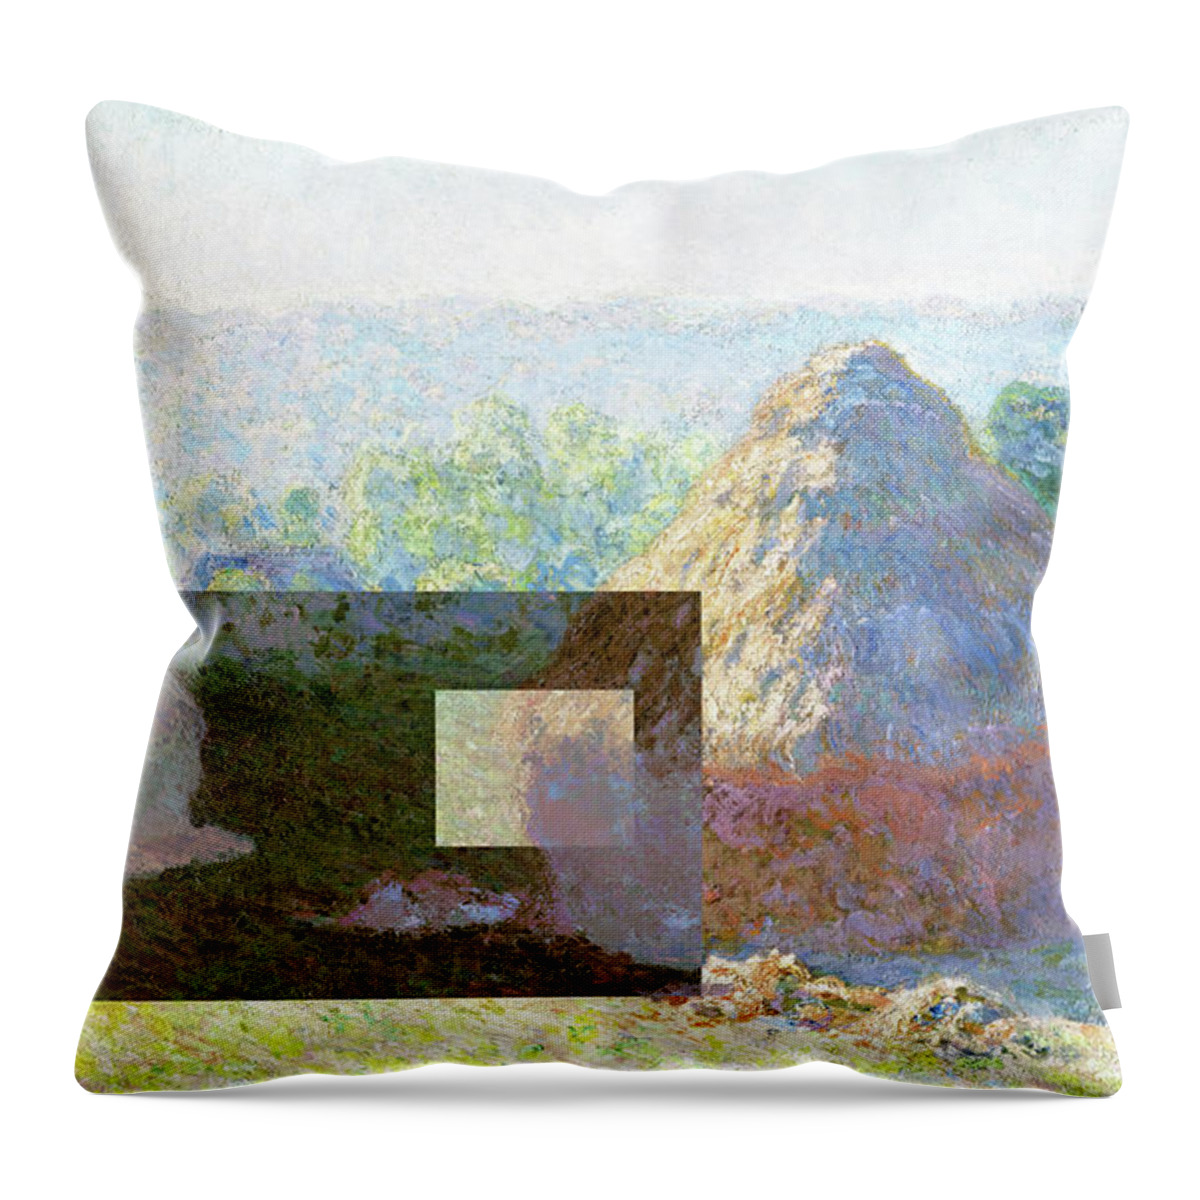 Abstract In The Living Room Throw Pillow featuring the digital art Inv Blend 9 Monet by David Bridburg